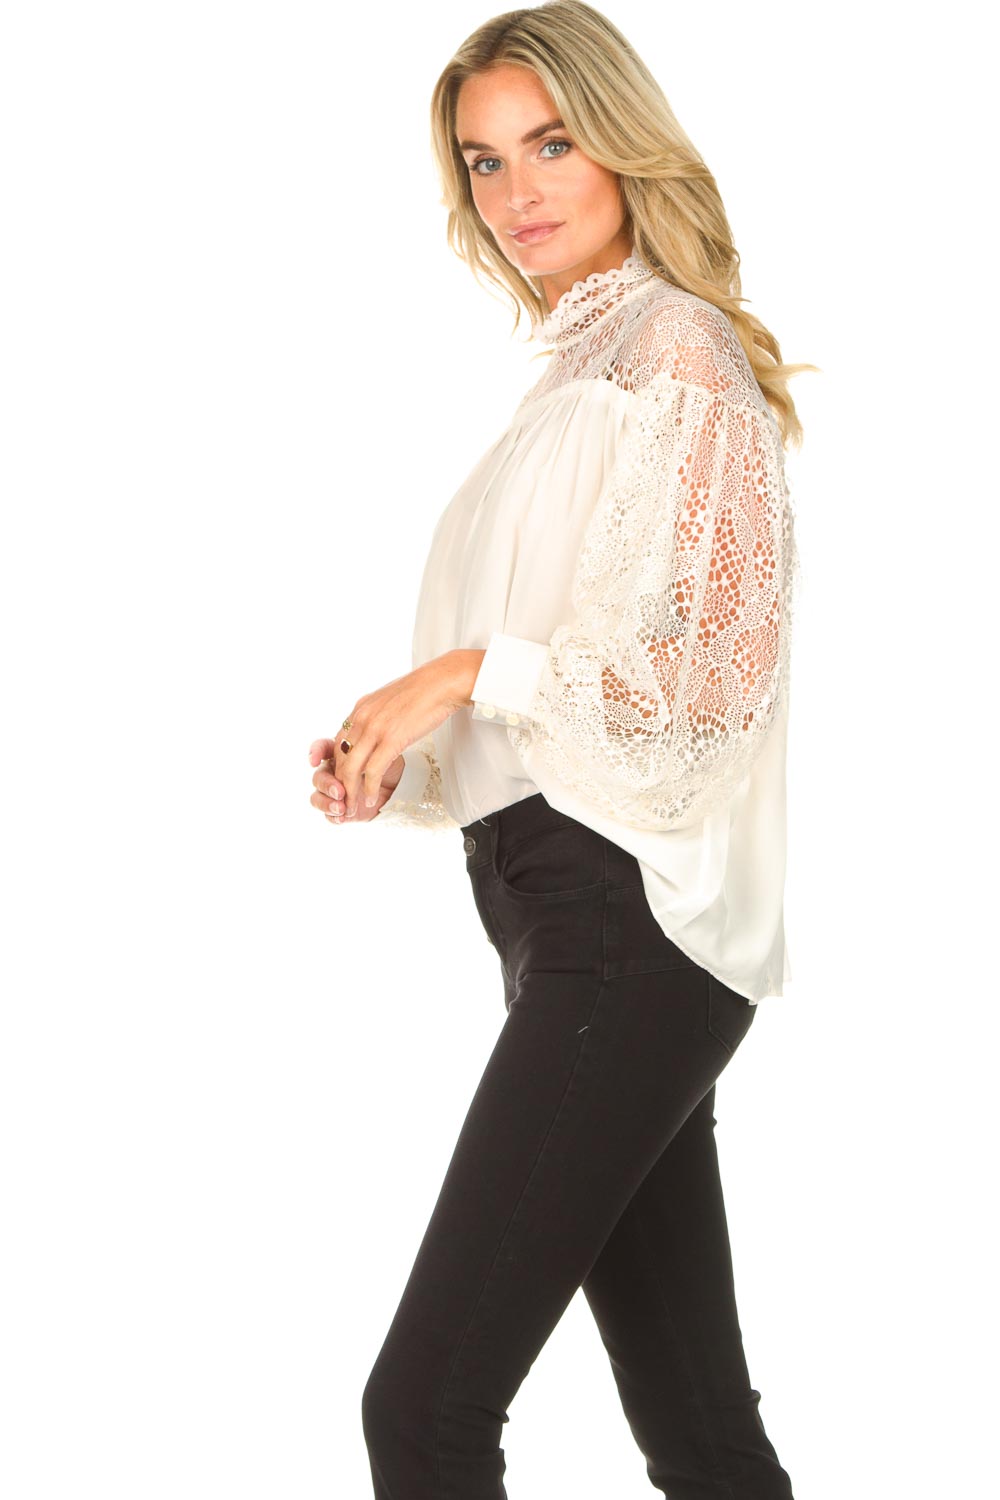 IRO Digwed Blouse in Off White Size 36